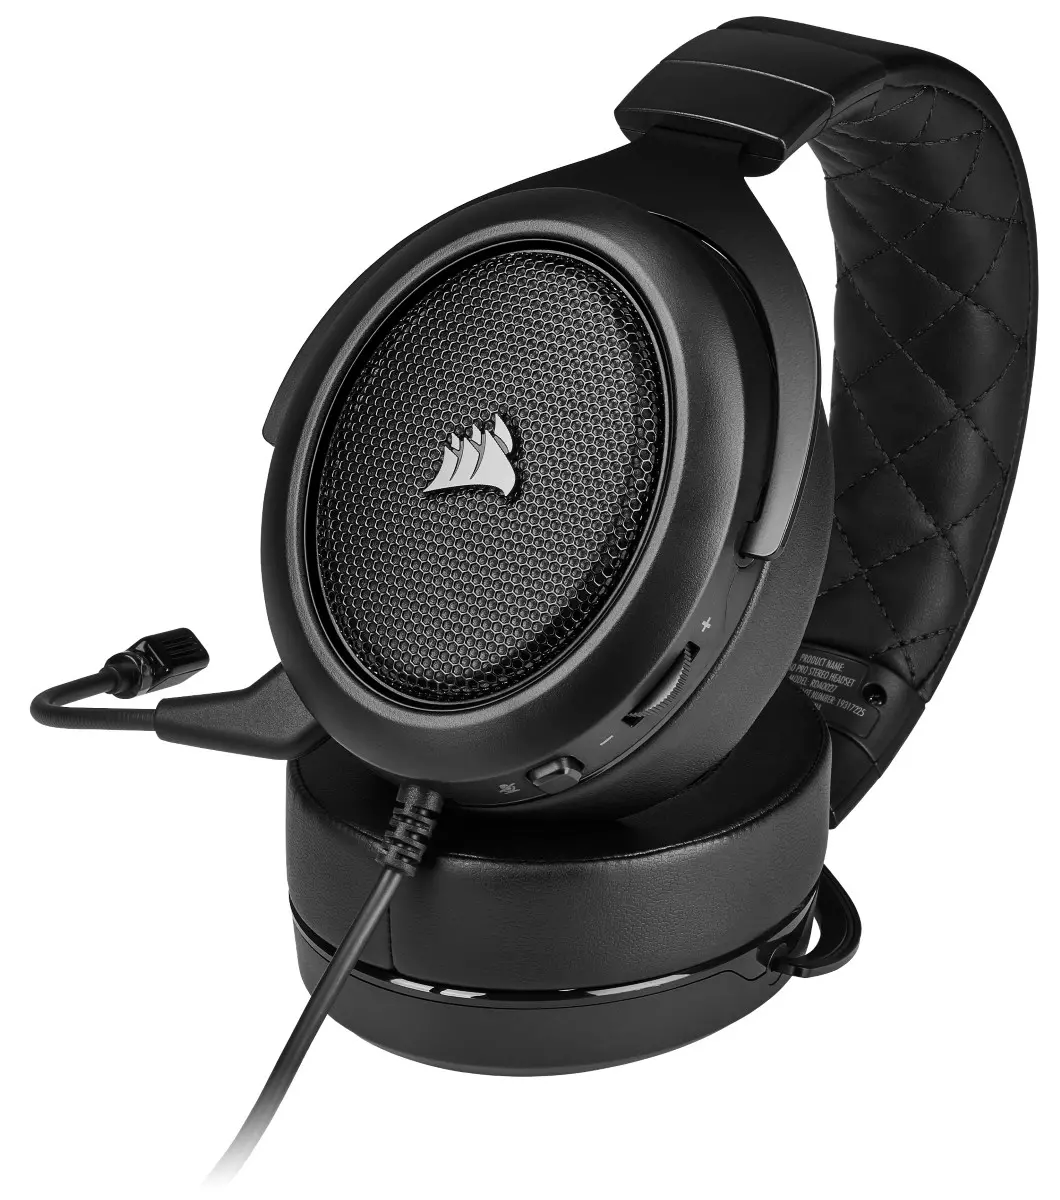 High quality gaming headset with built-in microphone